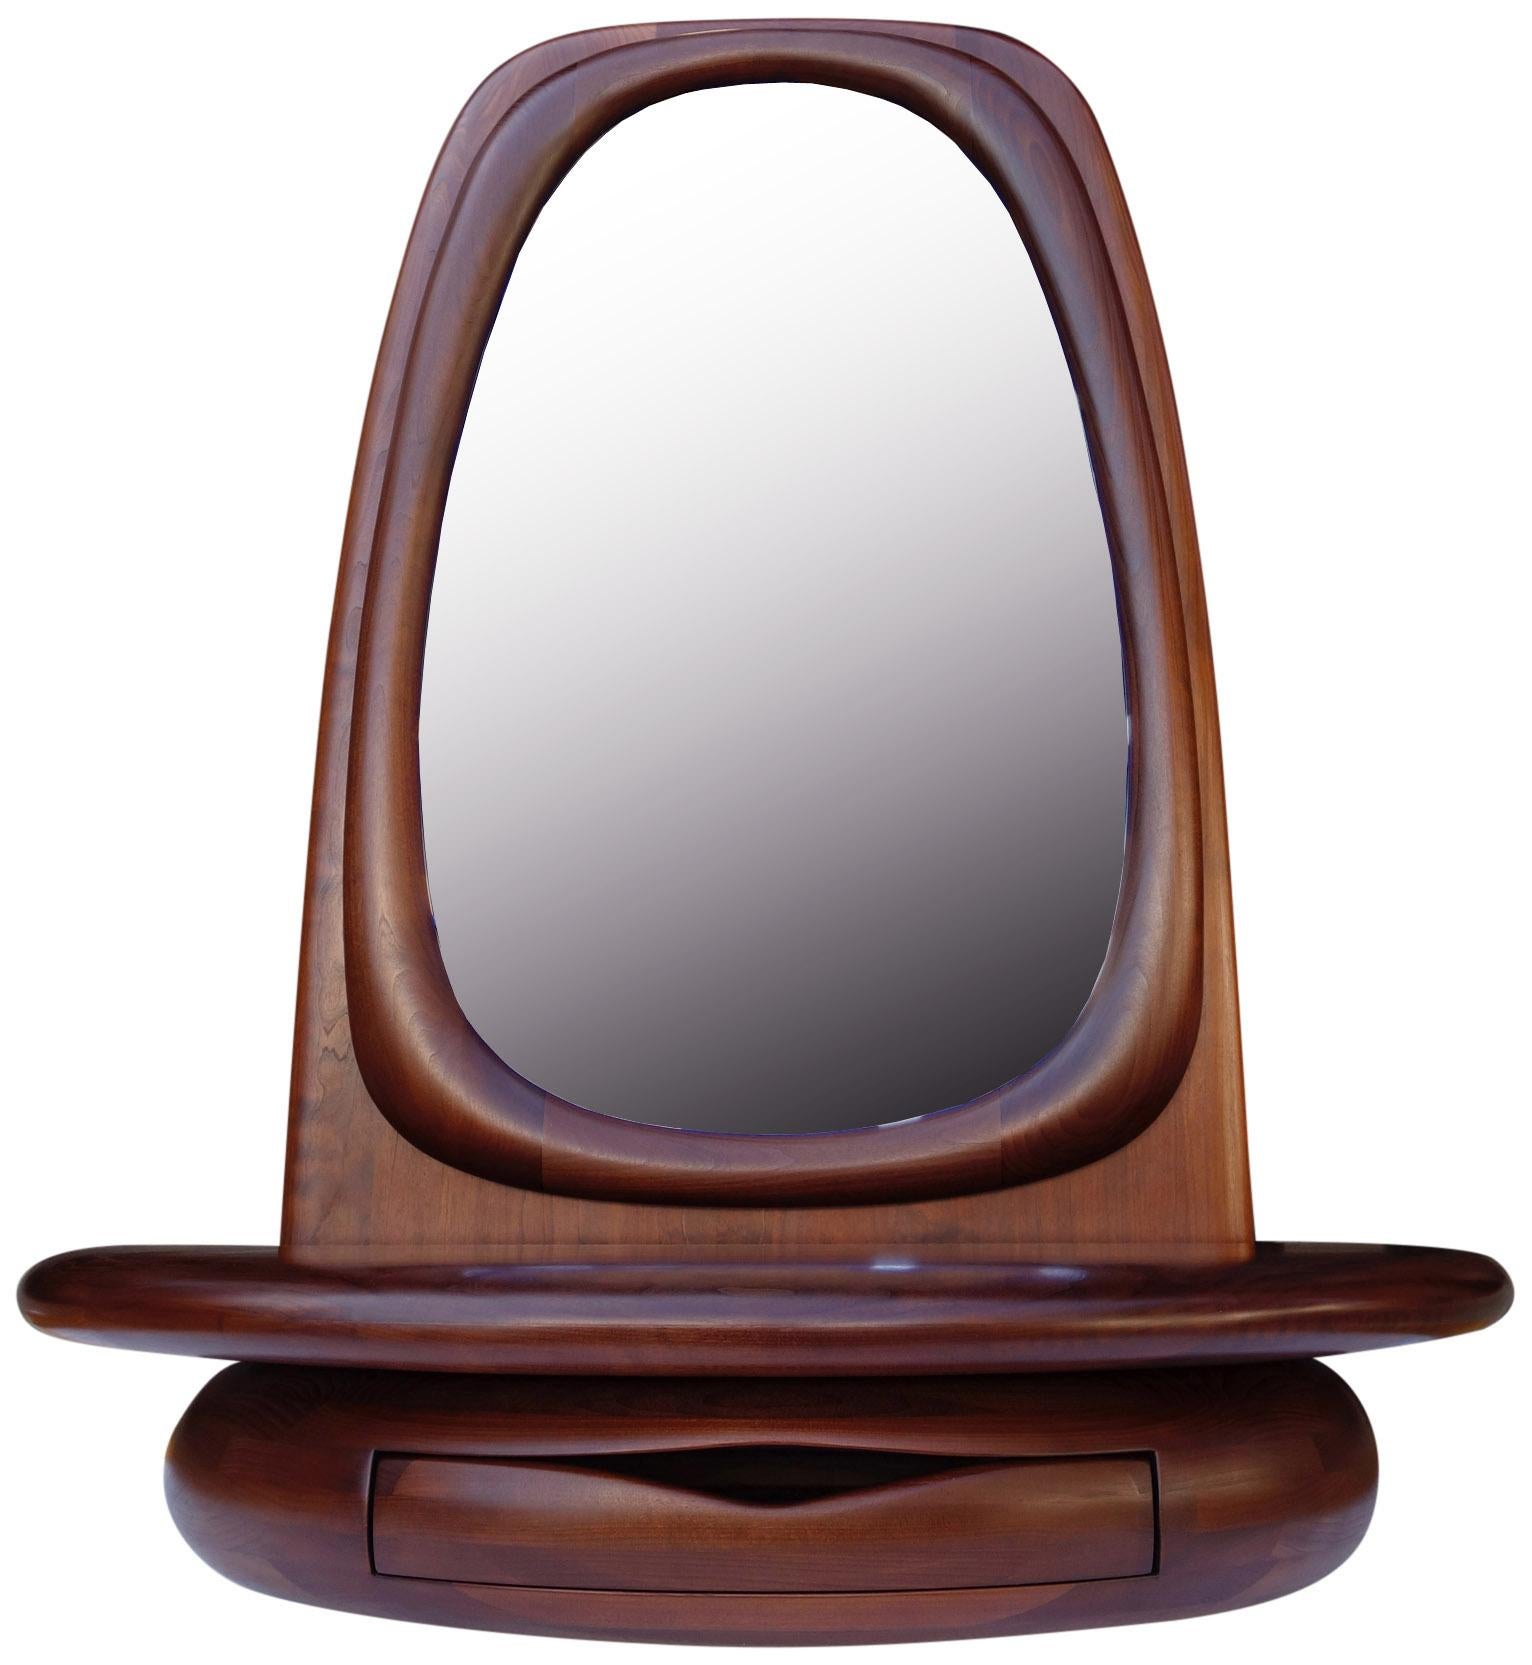 For your consideration is this beautifully sculpted mirror by Dean Santner. Master Craftsman Dean Santner designs are part of the American Modern Craft movement along side Wendell Castle, Nakashima, Phillip Powell to name a few

This hand sculpted